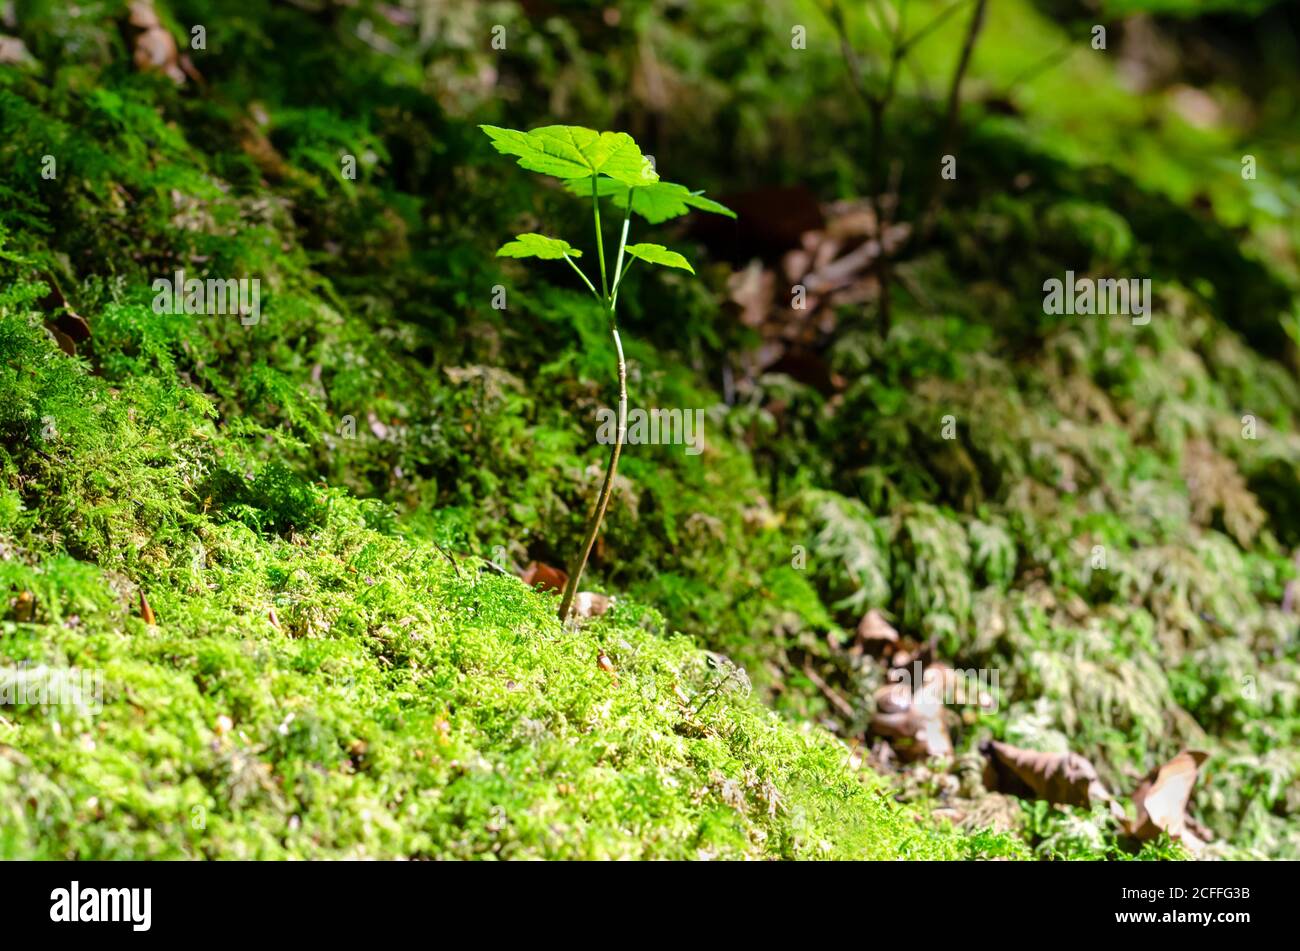 Young sycamore tree in the sunlight on a mossy forest floor. A sapling of Acer pseudoplatanus, a maple tree, native in Central Europe. Stock Photo